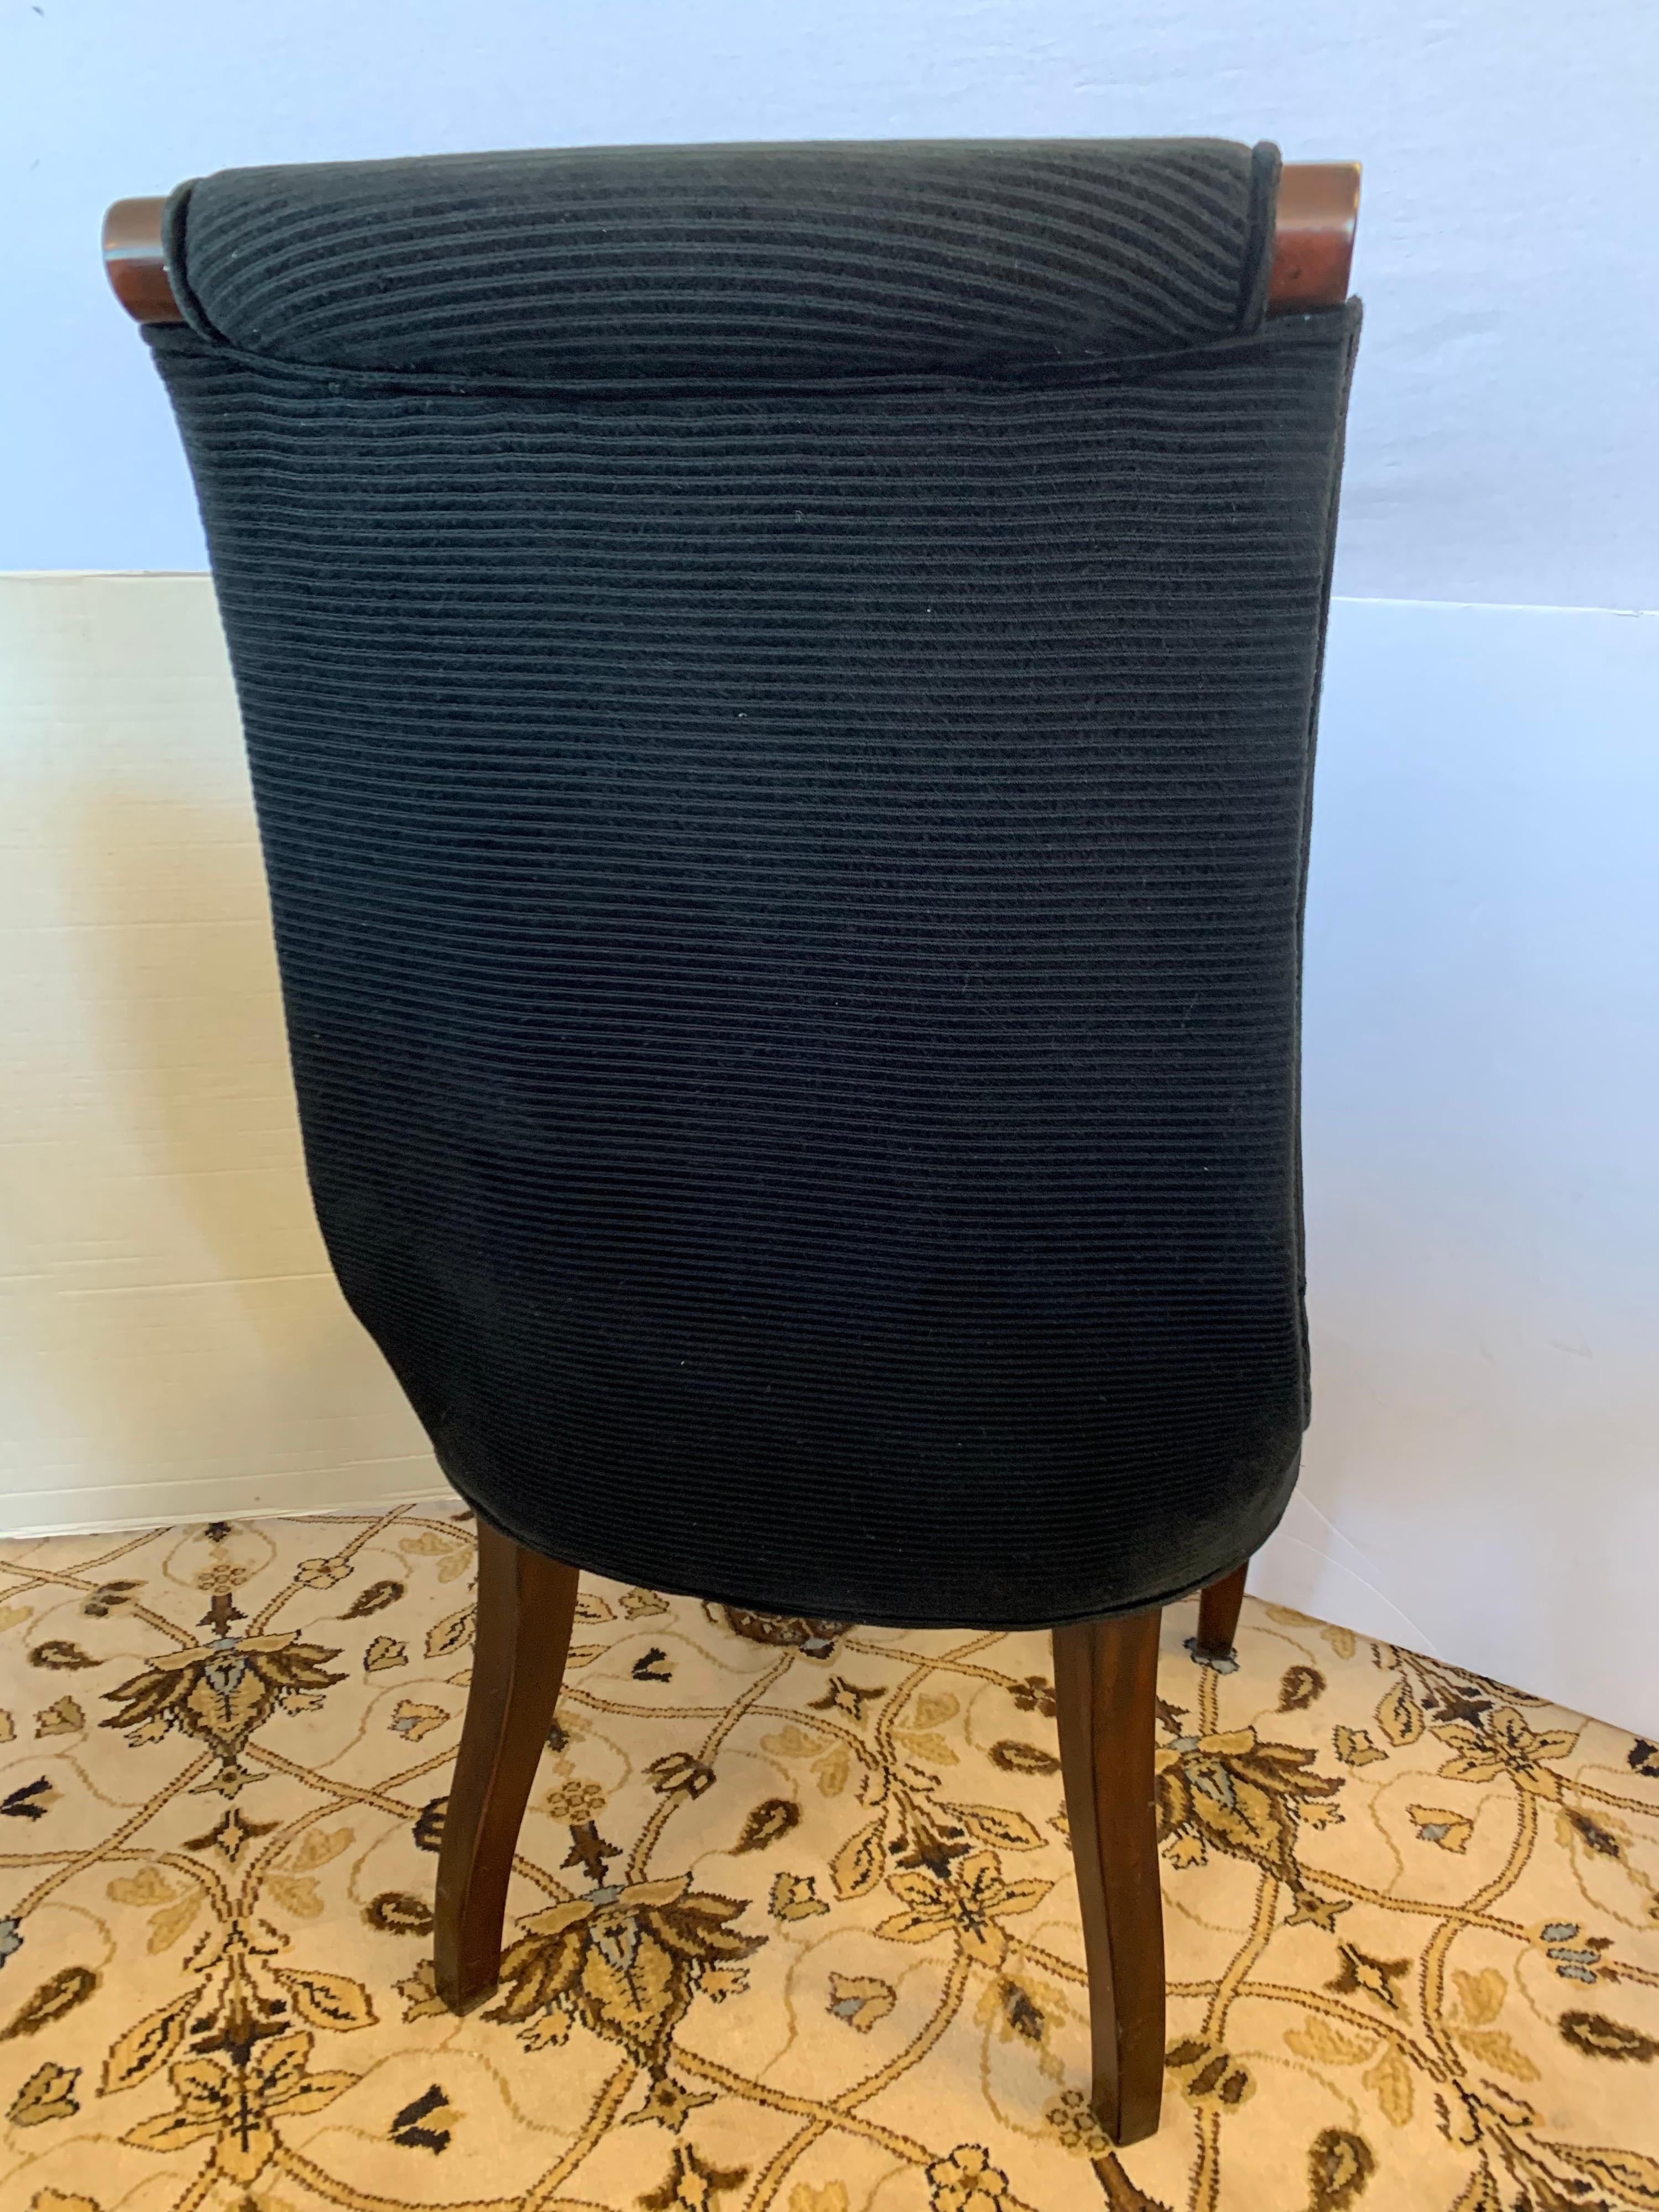 Magnificent set of twelve Henredon dining chairs done in mahogany wood and a luxurious
black velvet fabric that has subtle pinstripes running horizontally. All vendor hallmarks are at bottom
and these chairs originally retailed at 1895.00 per